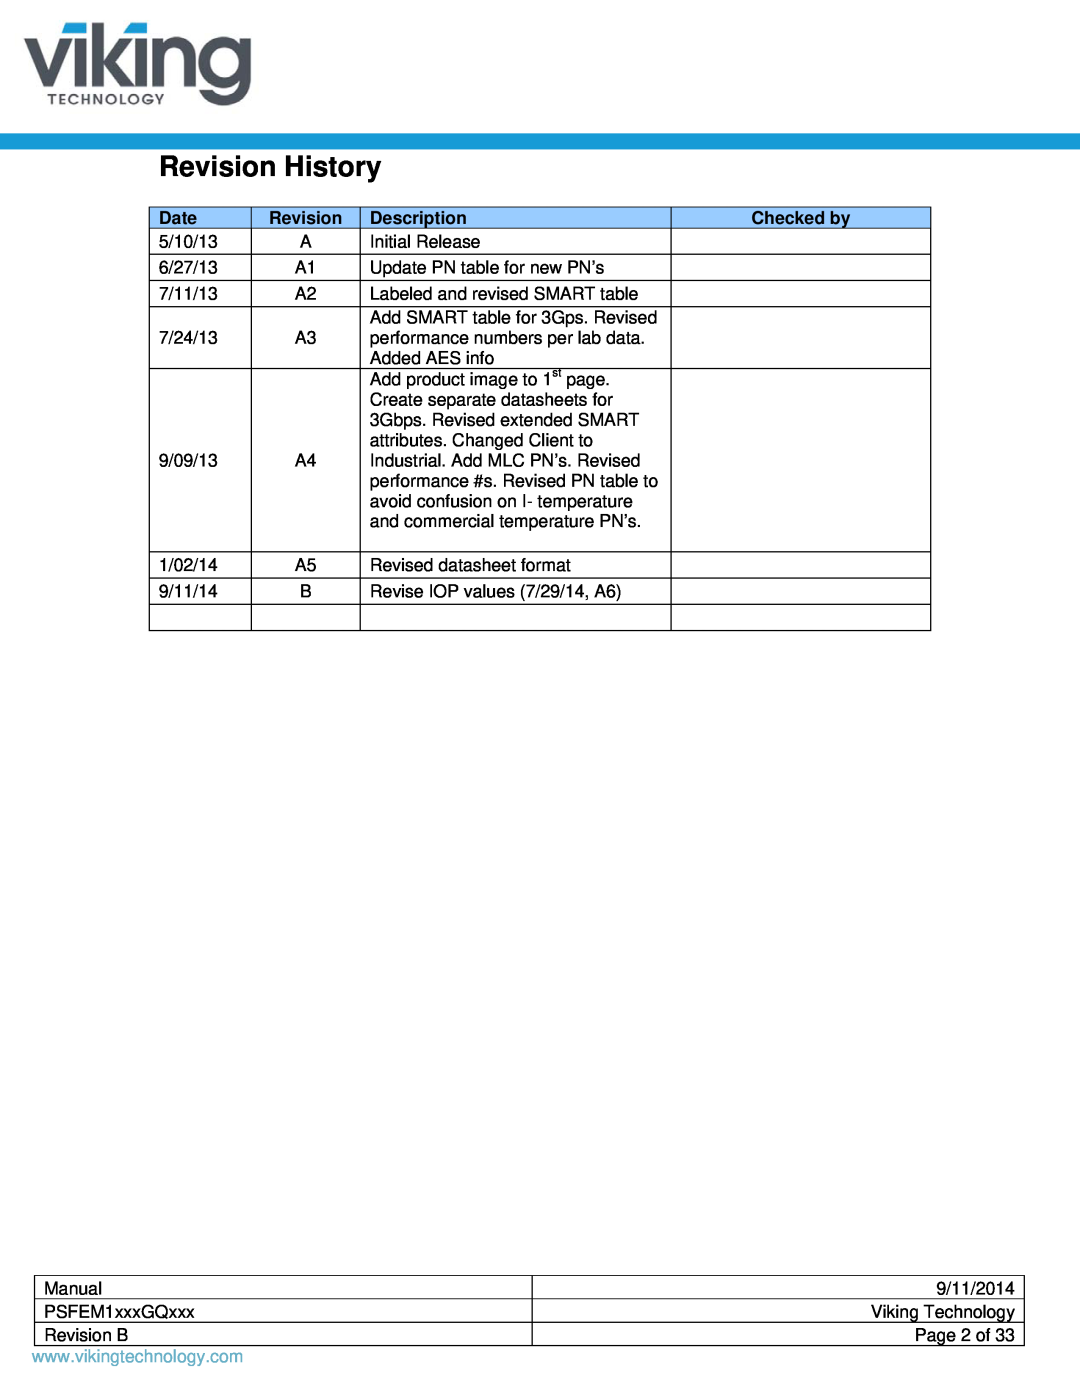 Viking PSFEM1xxxGQxxx manual Revision History, Date, Description, Checked by 